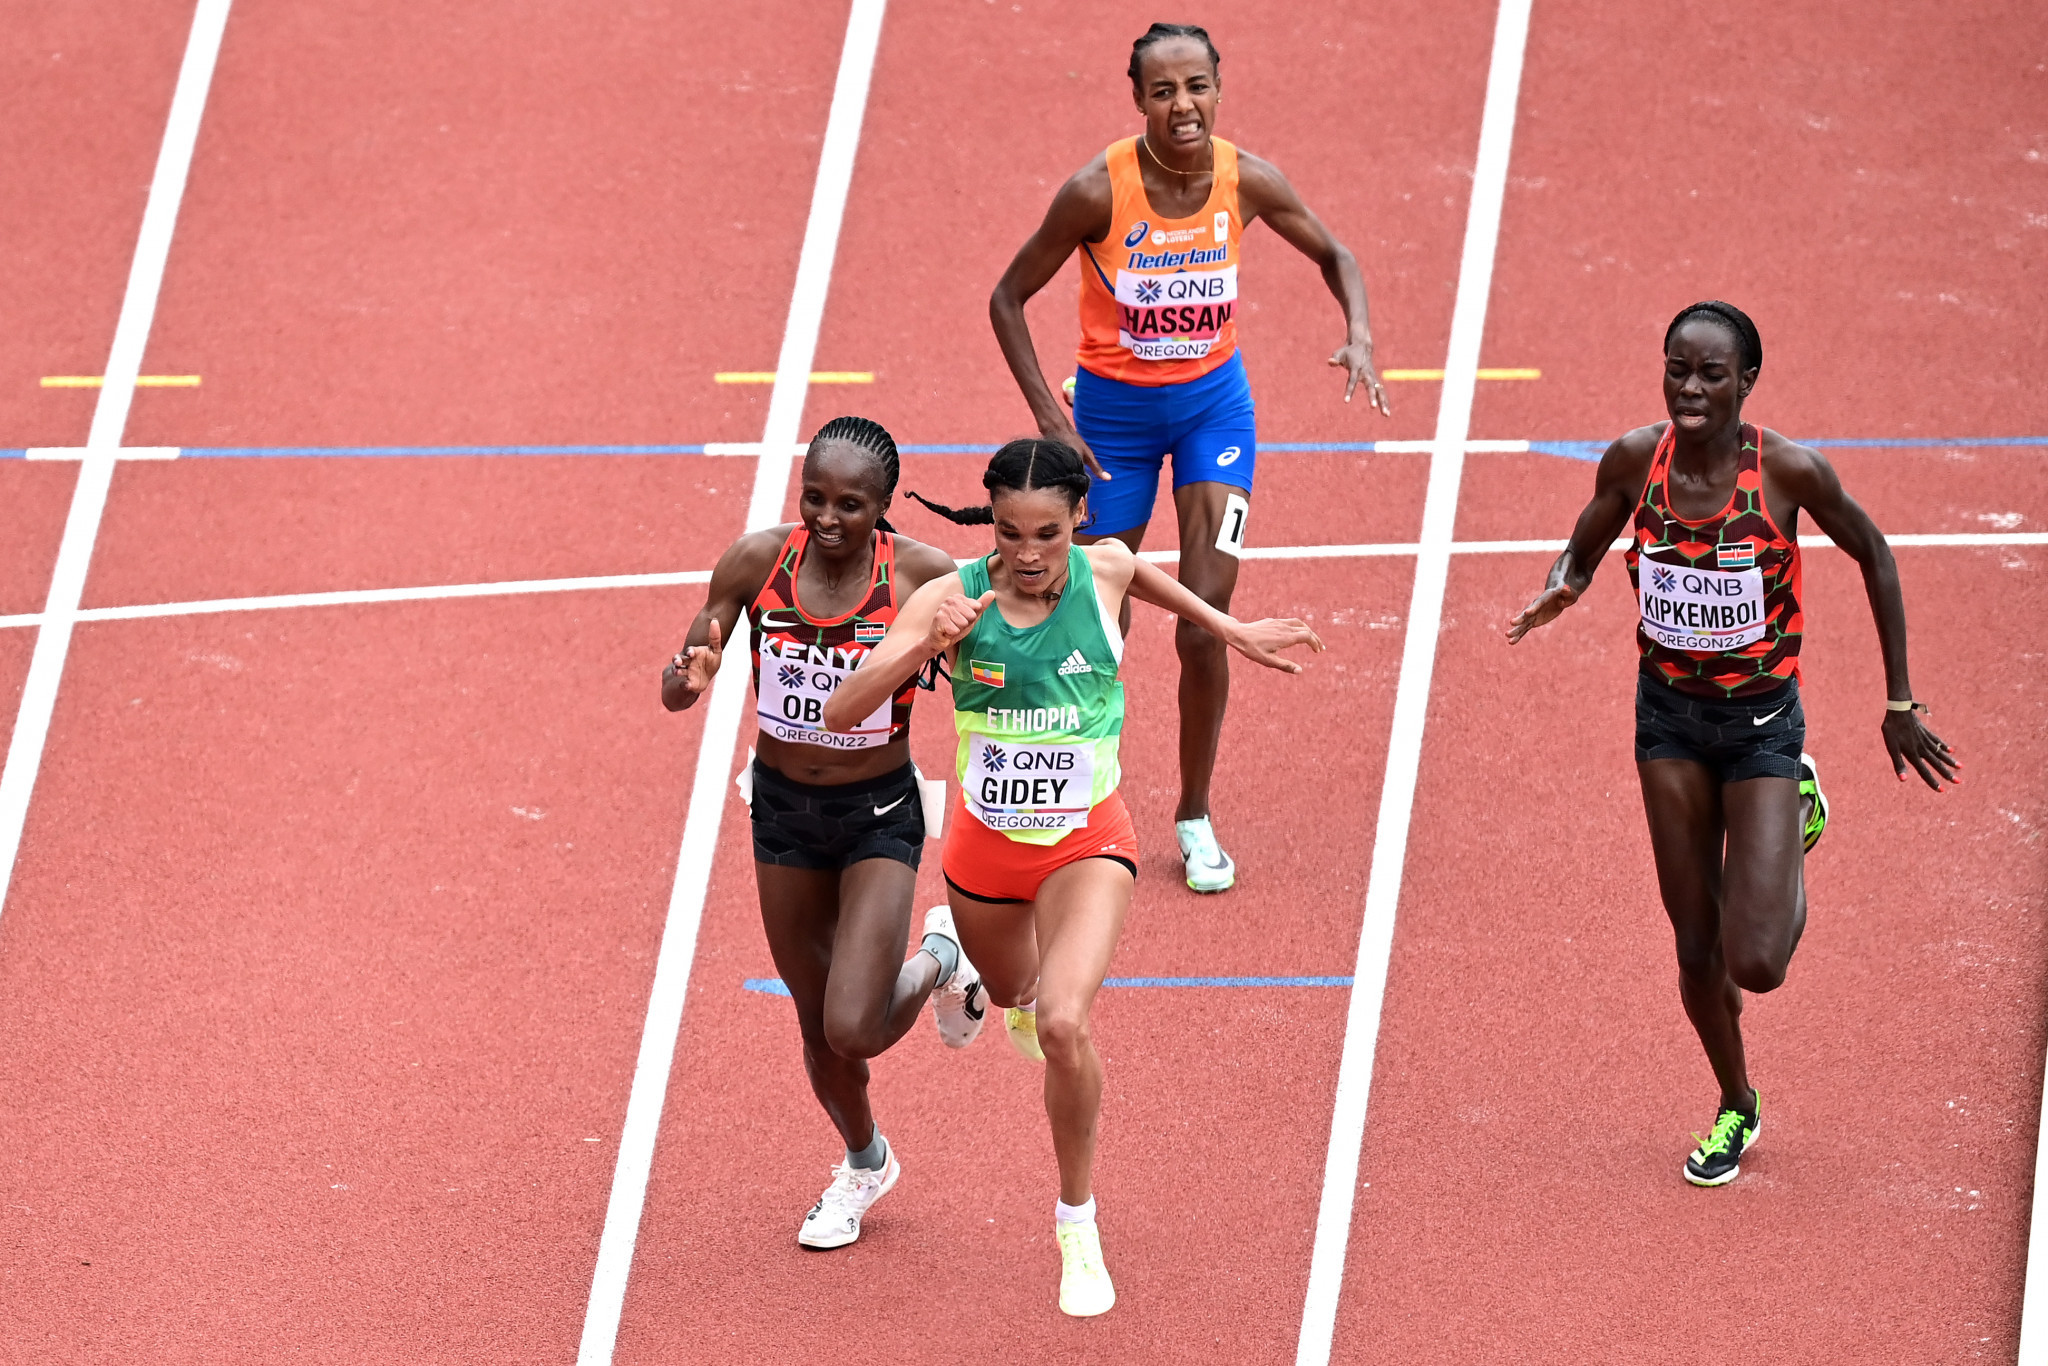 There was a thrilling finish in the women's 10,000m where Ethiopia's Letesenbet Gidey hung on in a sprint finish to claim her first World Championships title ©Getty Images